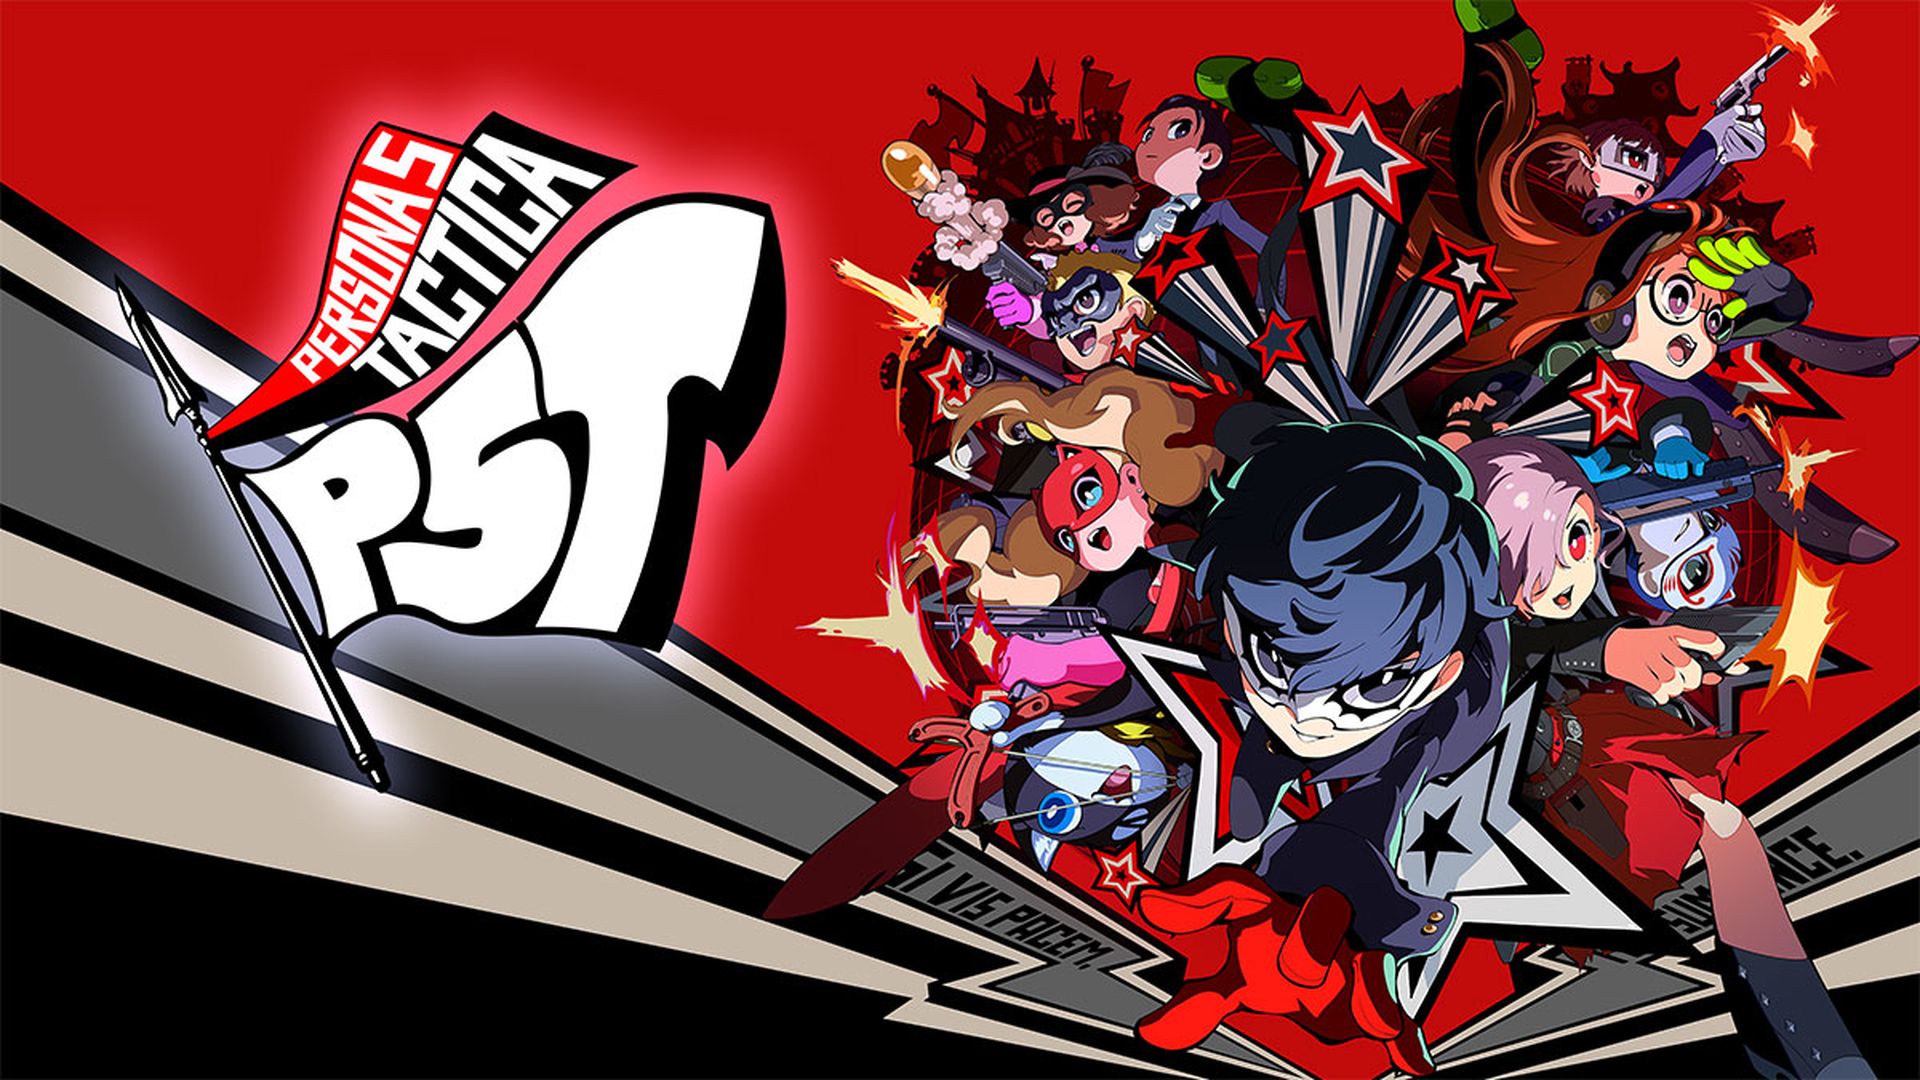 Persona 5 Tactica money farming ways you need to know